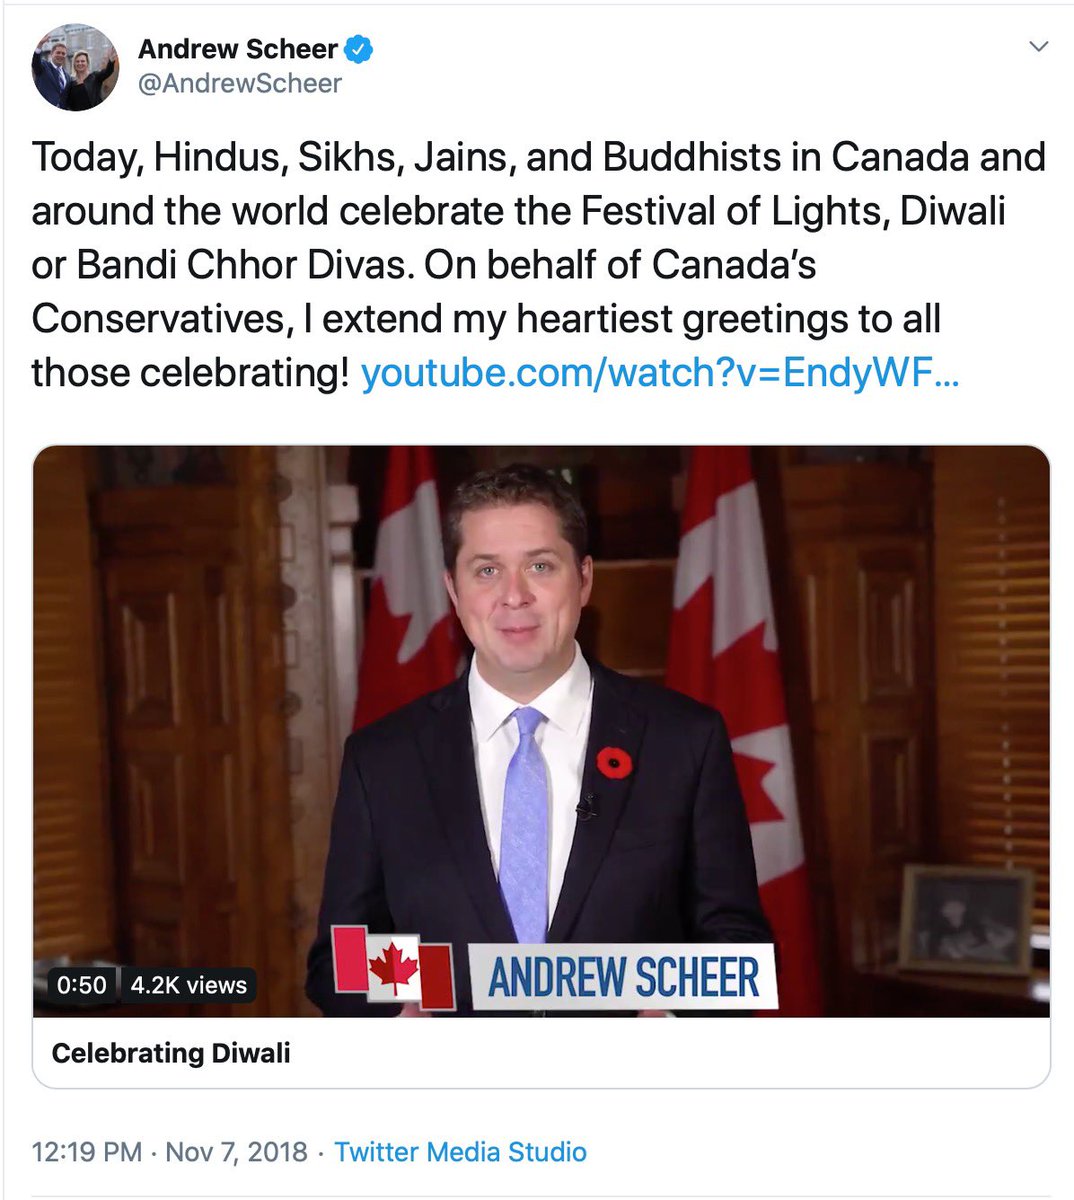 This is what basic respect for a community looks like:“while other cultural groups – be they religious, national or ethnic – command that respect without question.”   https://www.theglobeandmail.com/opinion/article-the-conservatives-cant-be-stuck-in-the-past-on-lgbtq-rights/